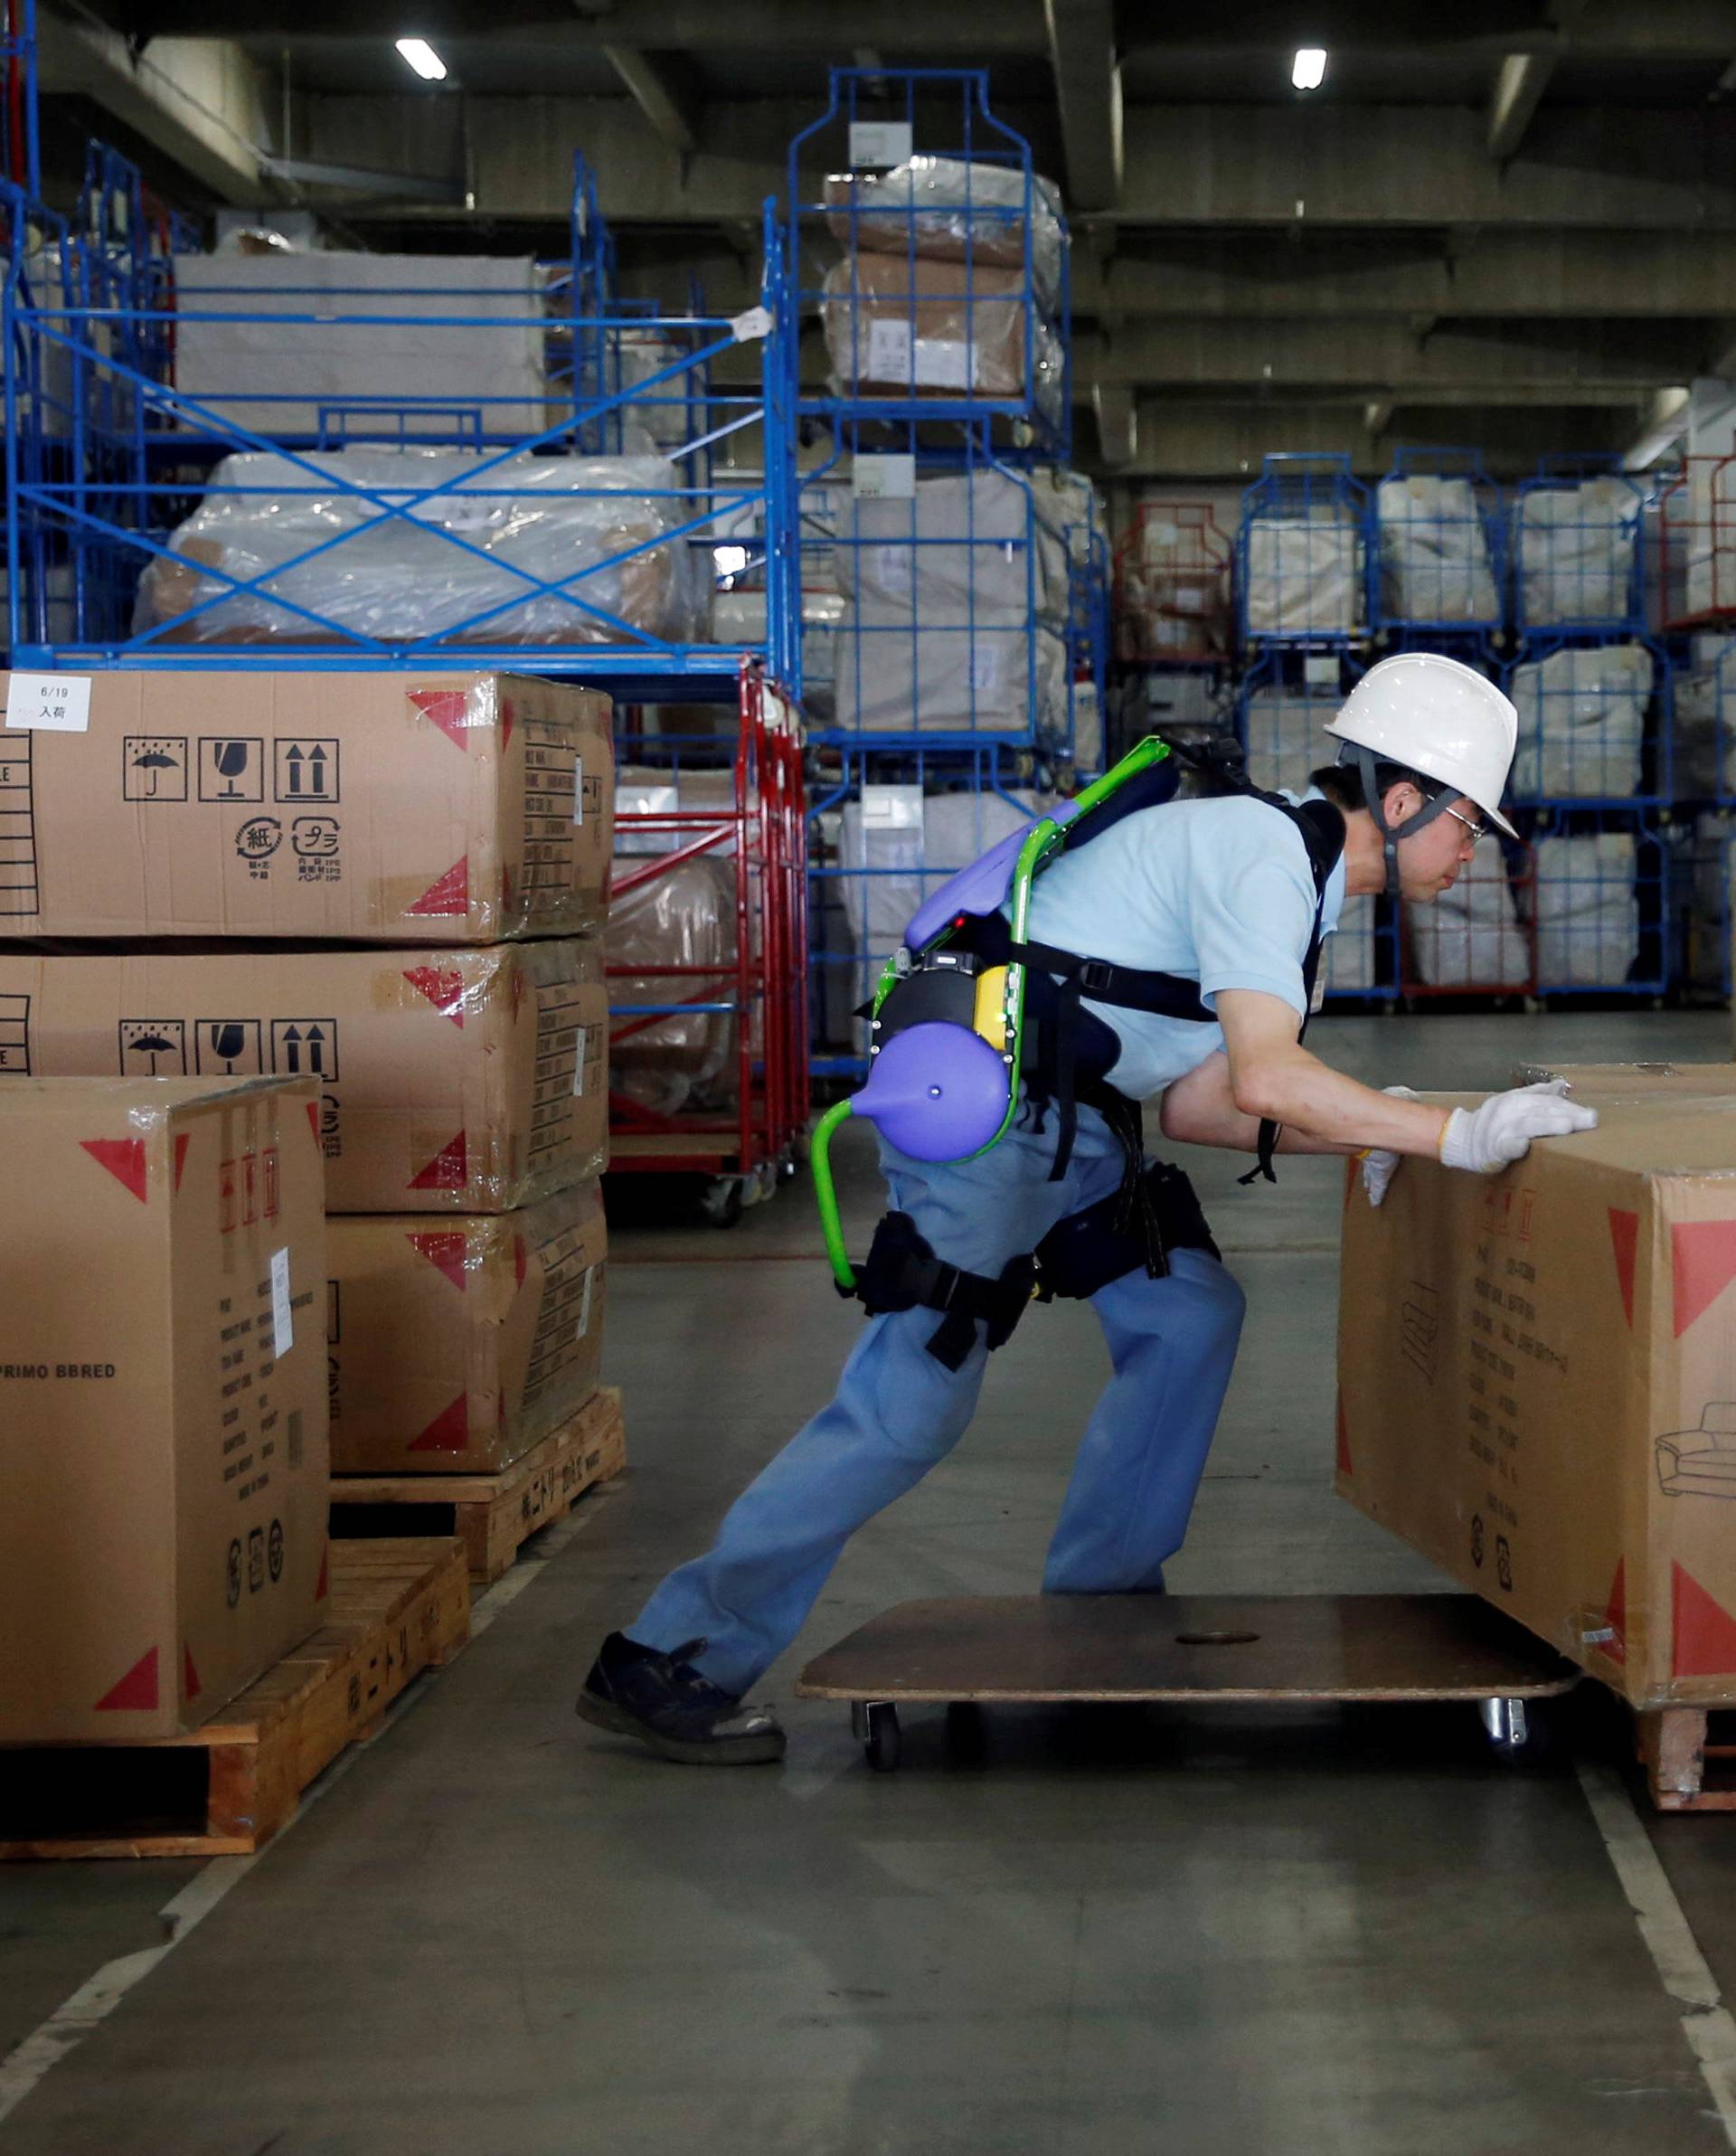 Okutani, 57, a contract worker of Ueda Co., Ltd., wears an Atoun Inc. Power Assist Suit, as he works at a distribution center in Kawasaki